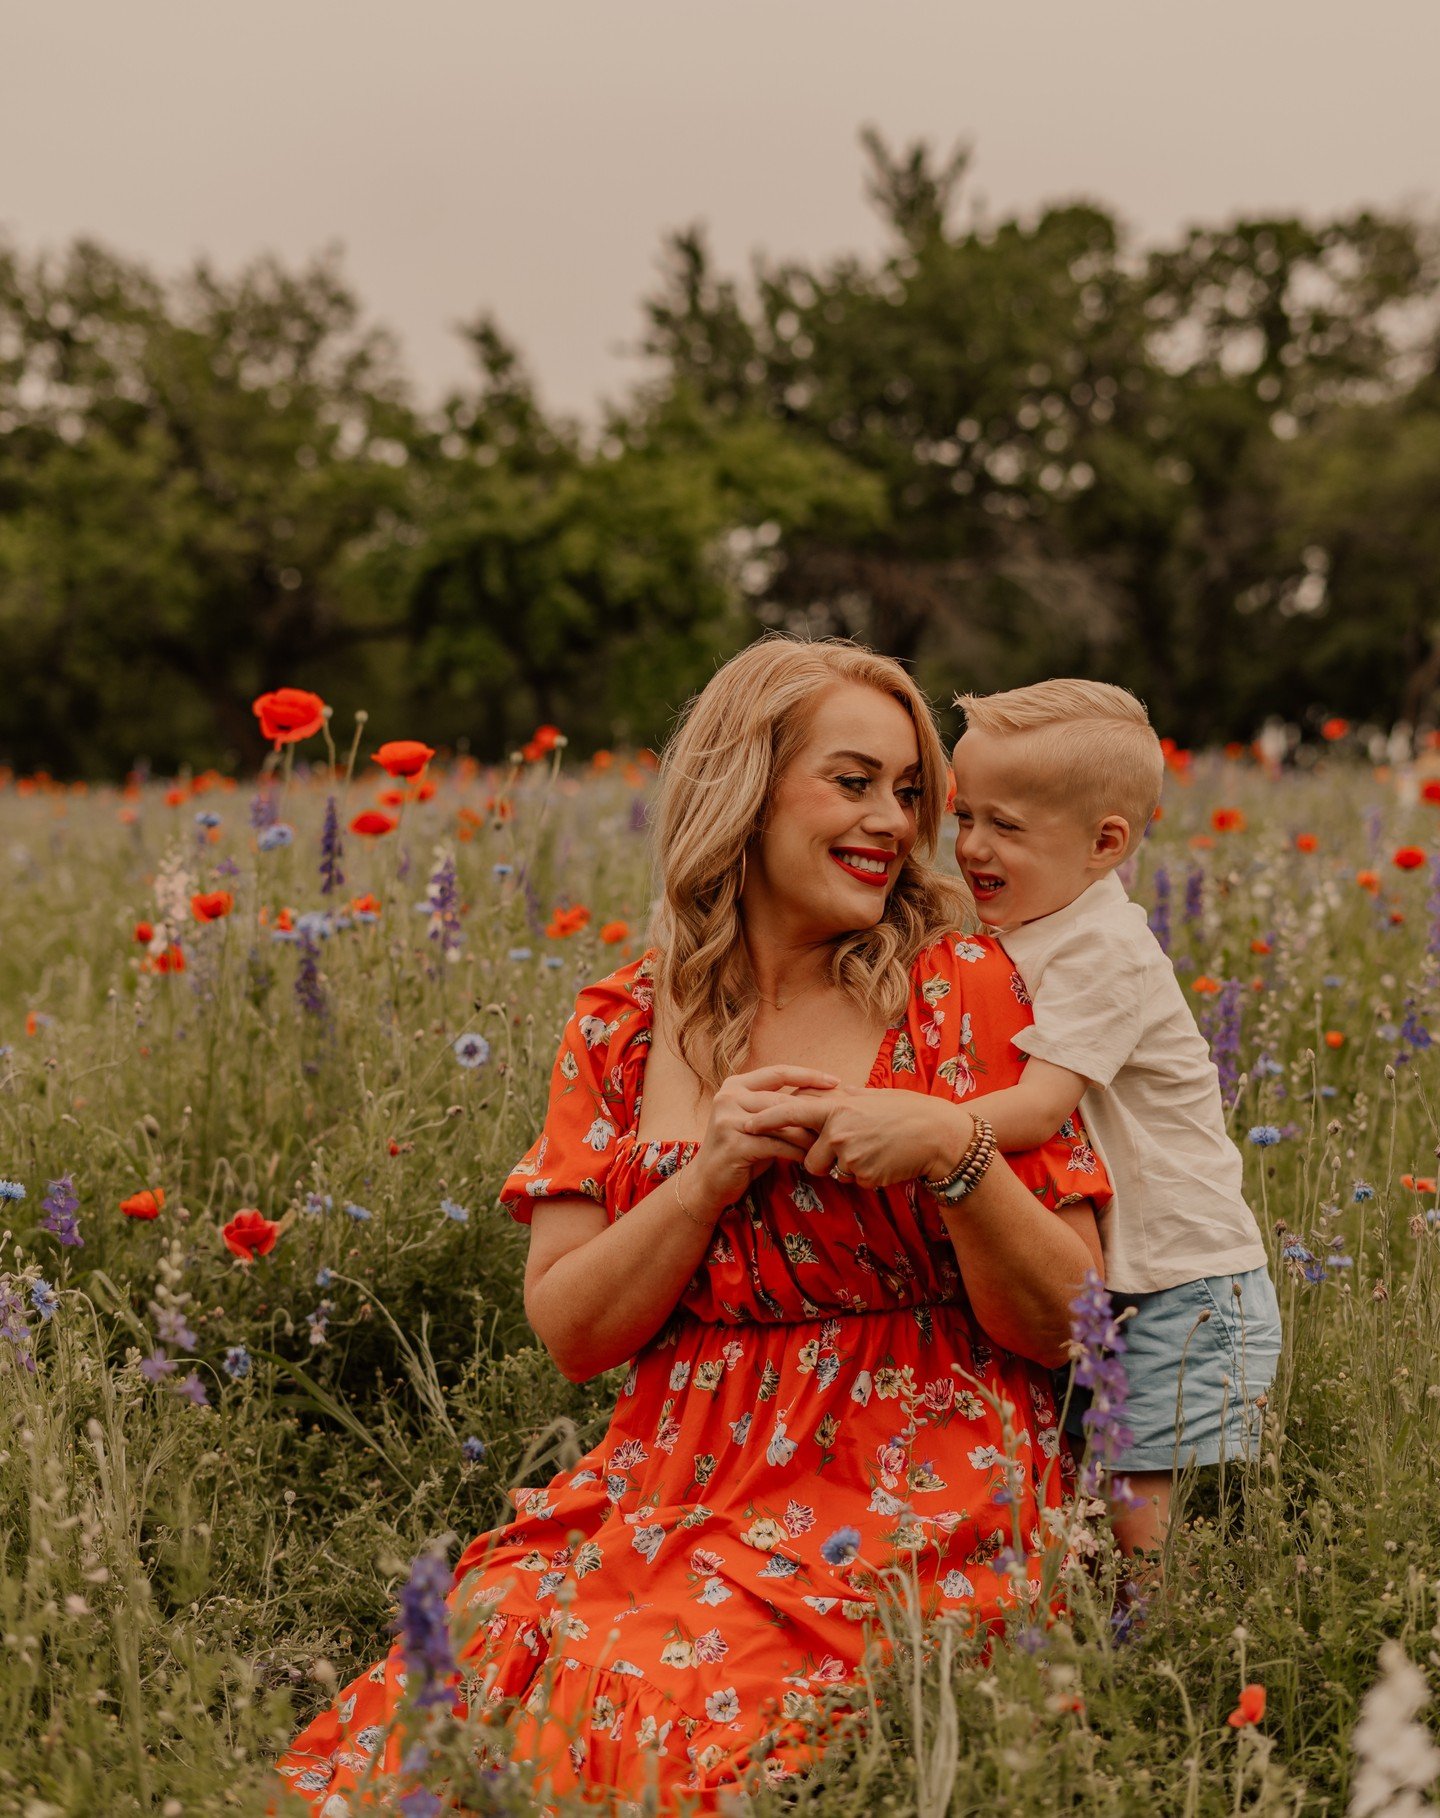 Loved getting to meet some new friends at the Wildflowers this year! Amy and her little man were a dream to photograph in the flowers! ❤️